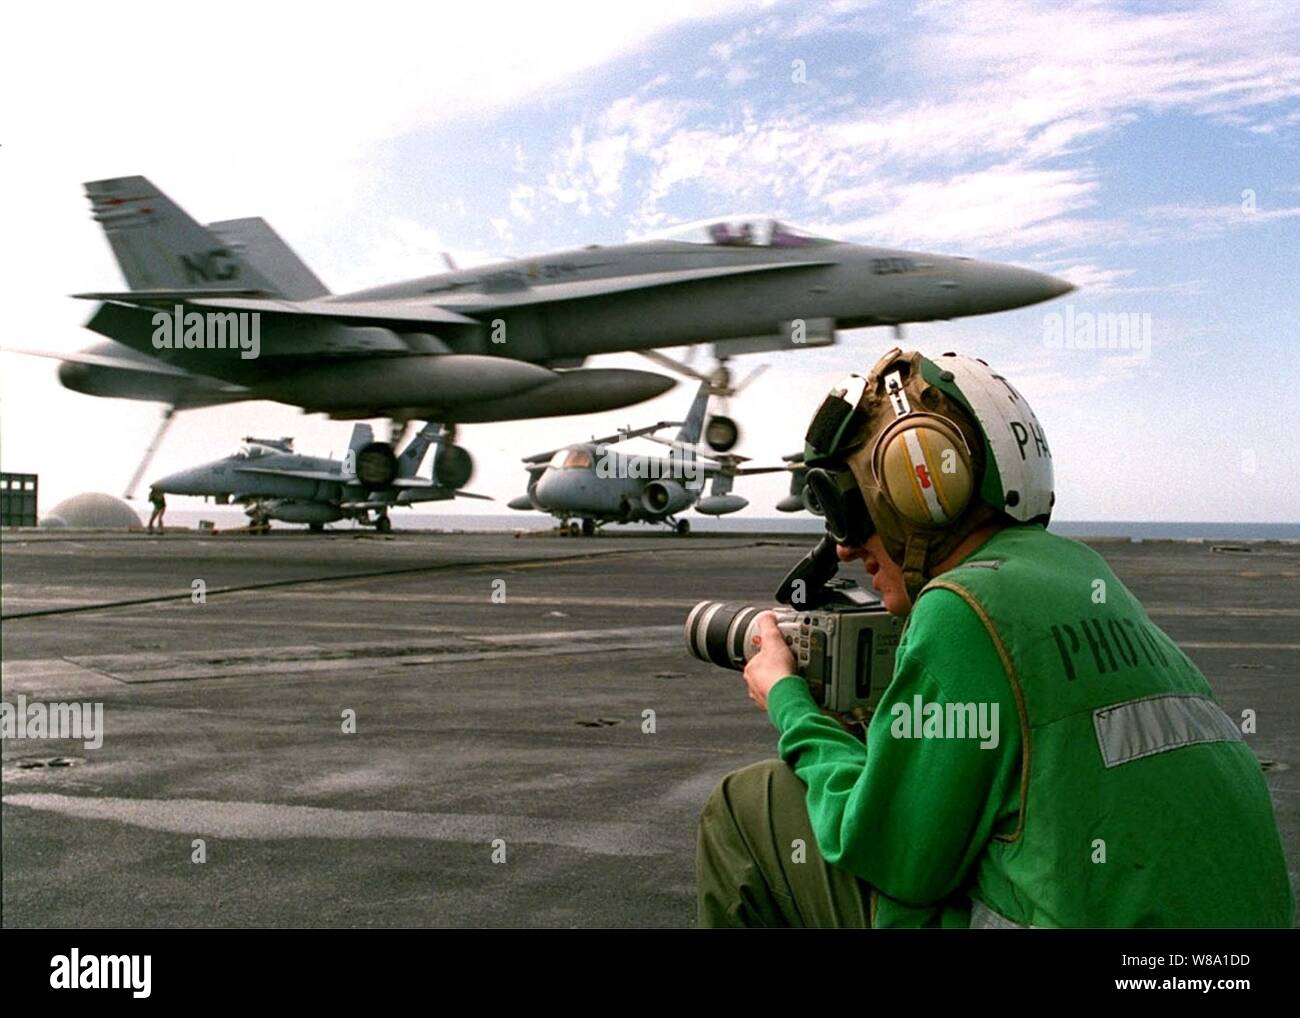 U.S. Navy Photographer's Mate Airman Benjamin Story uses a Hi-8 video camera to document daily flight operations on the flight deck of the aircraft carrier USS Nimitz (CVN 68) in the Persian Gulf on Nov. 6, 1997.  The Nimitz and embarked Carrier Air Wing 9 are operating in the Persian Gulf in support of the U.S. and coalition enforcement of the no-fly-zone over Southern Iraq.  Story, from Pomfret, Md., is assigned to the Operations Department, Photographic Division. Stock Photo